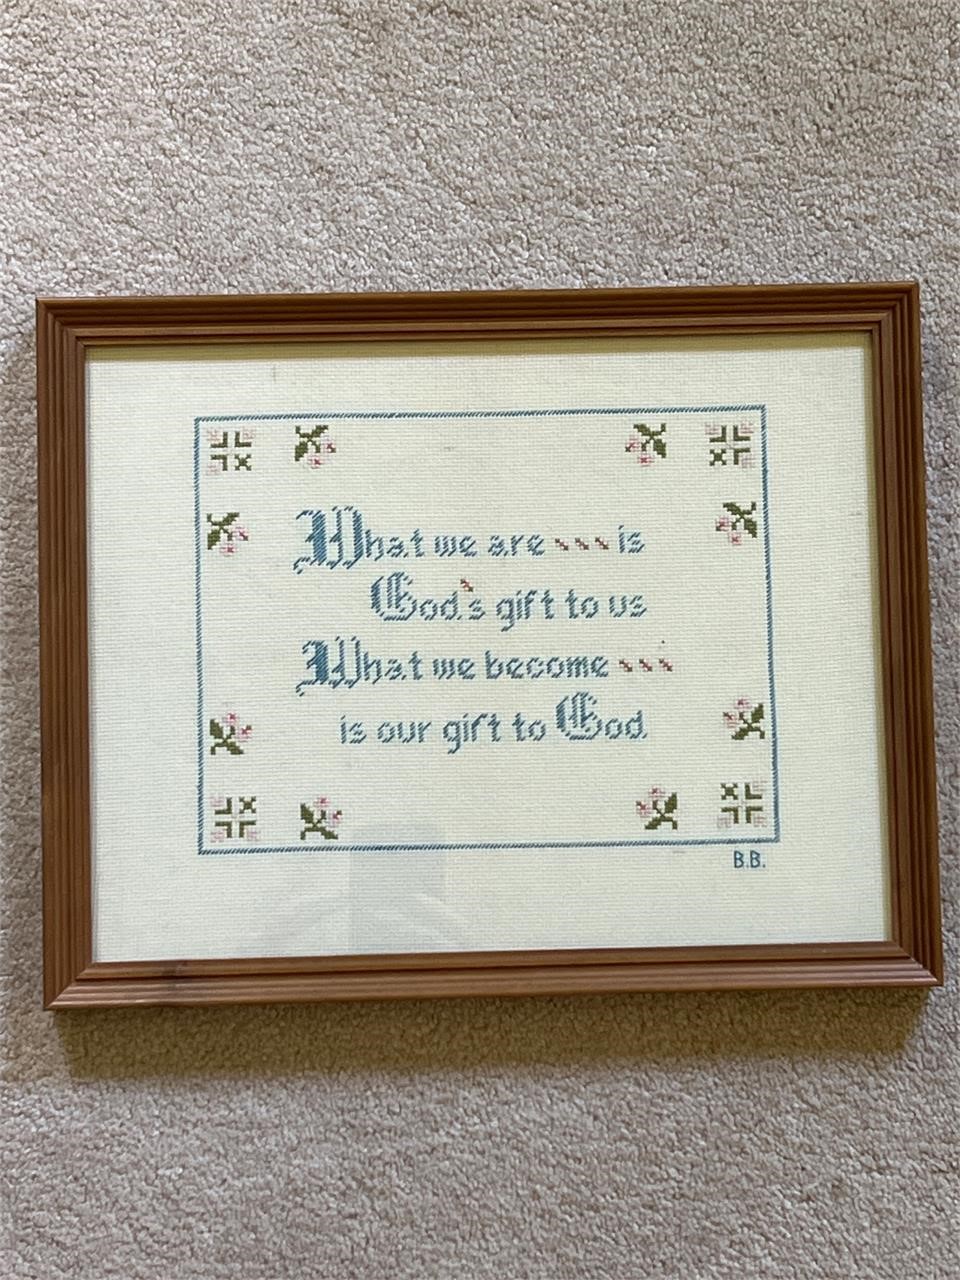 Vintage needlepoint What we are is